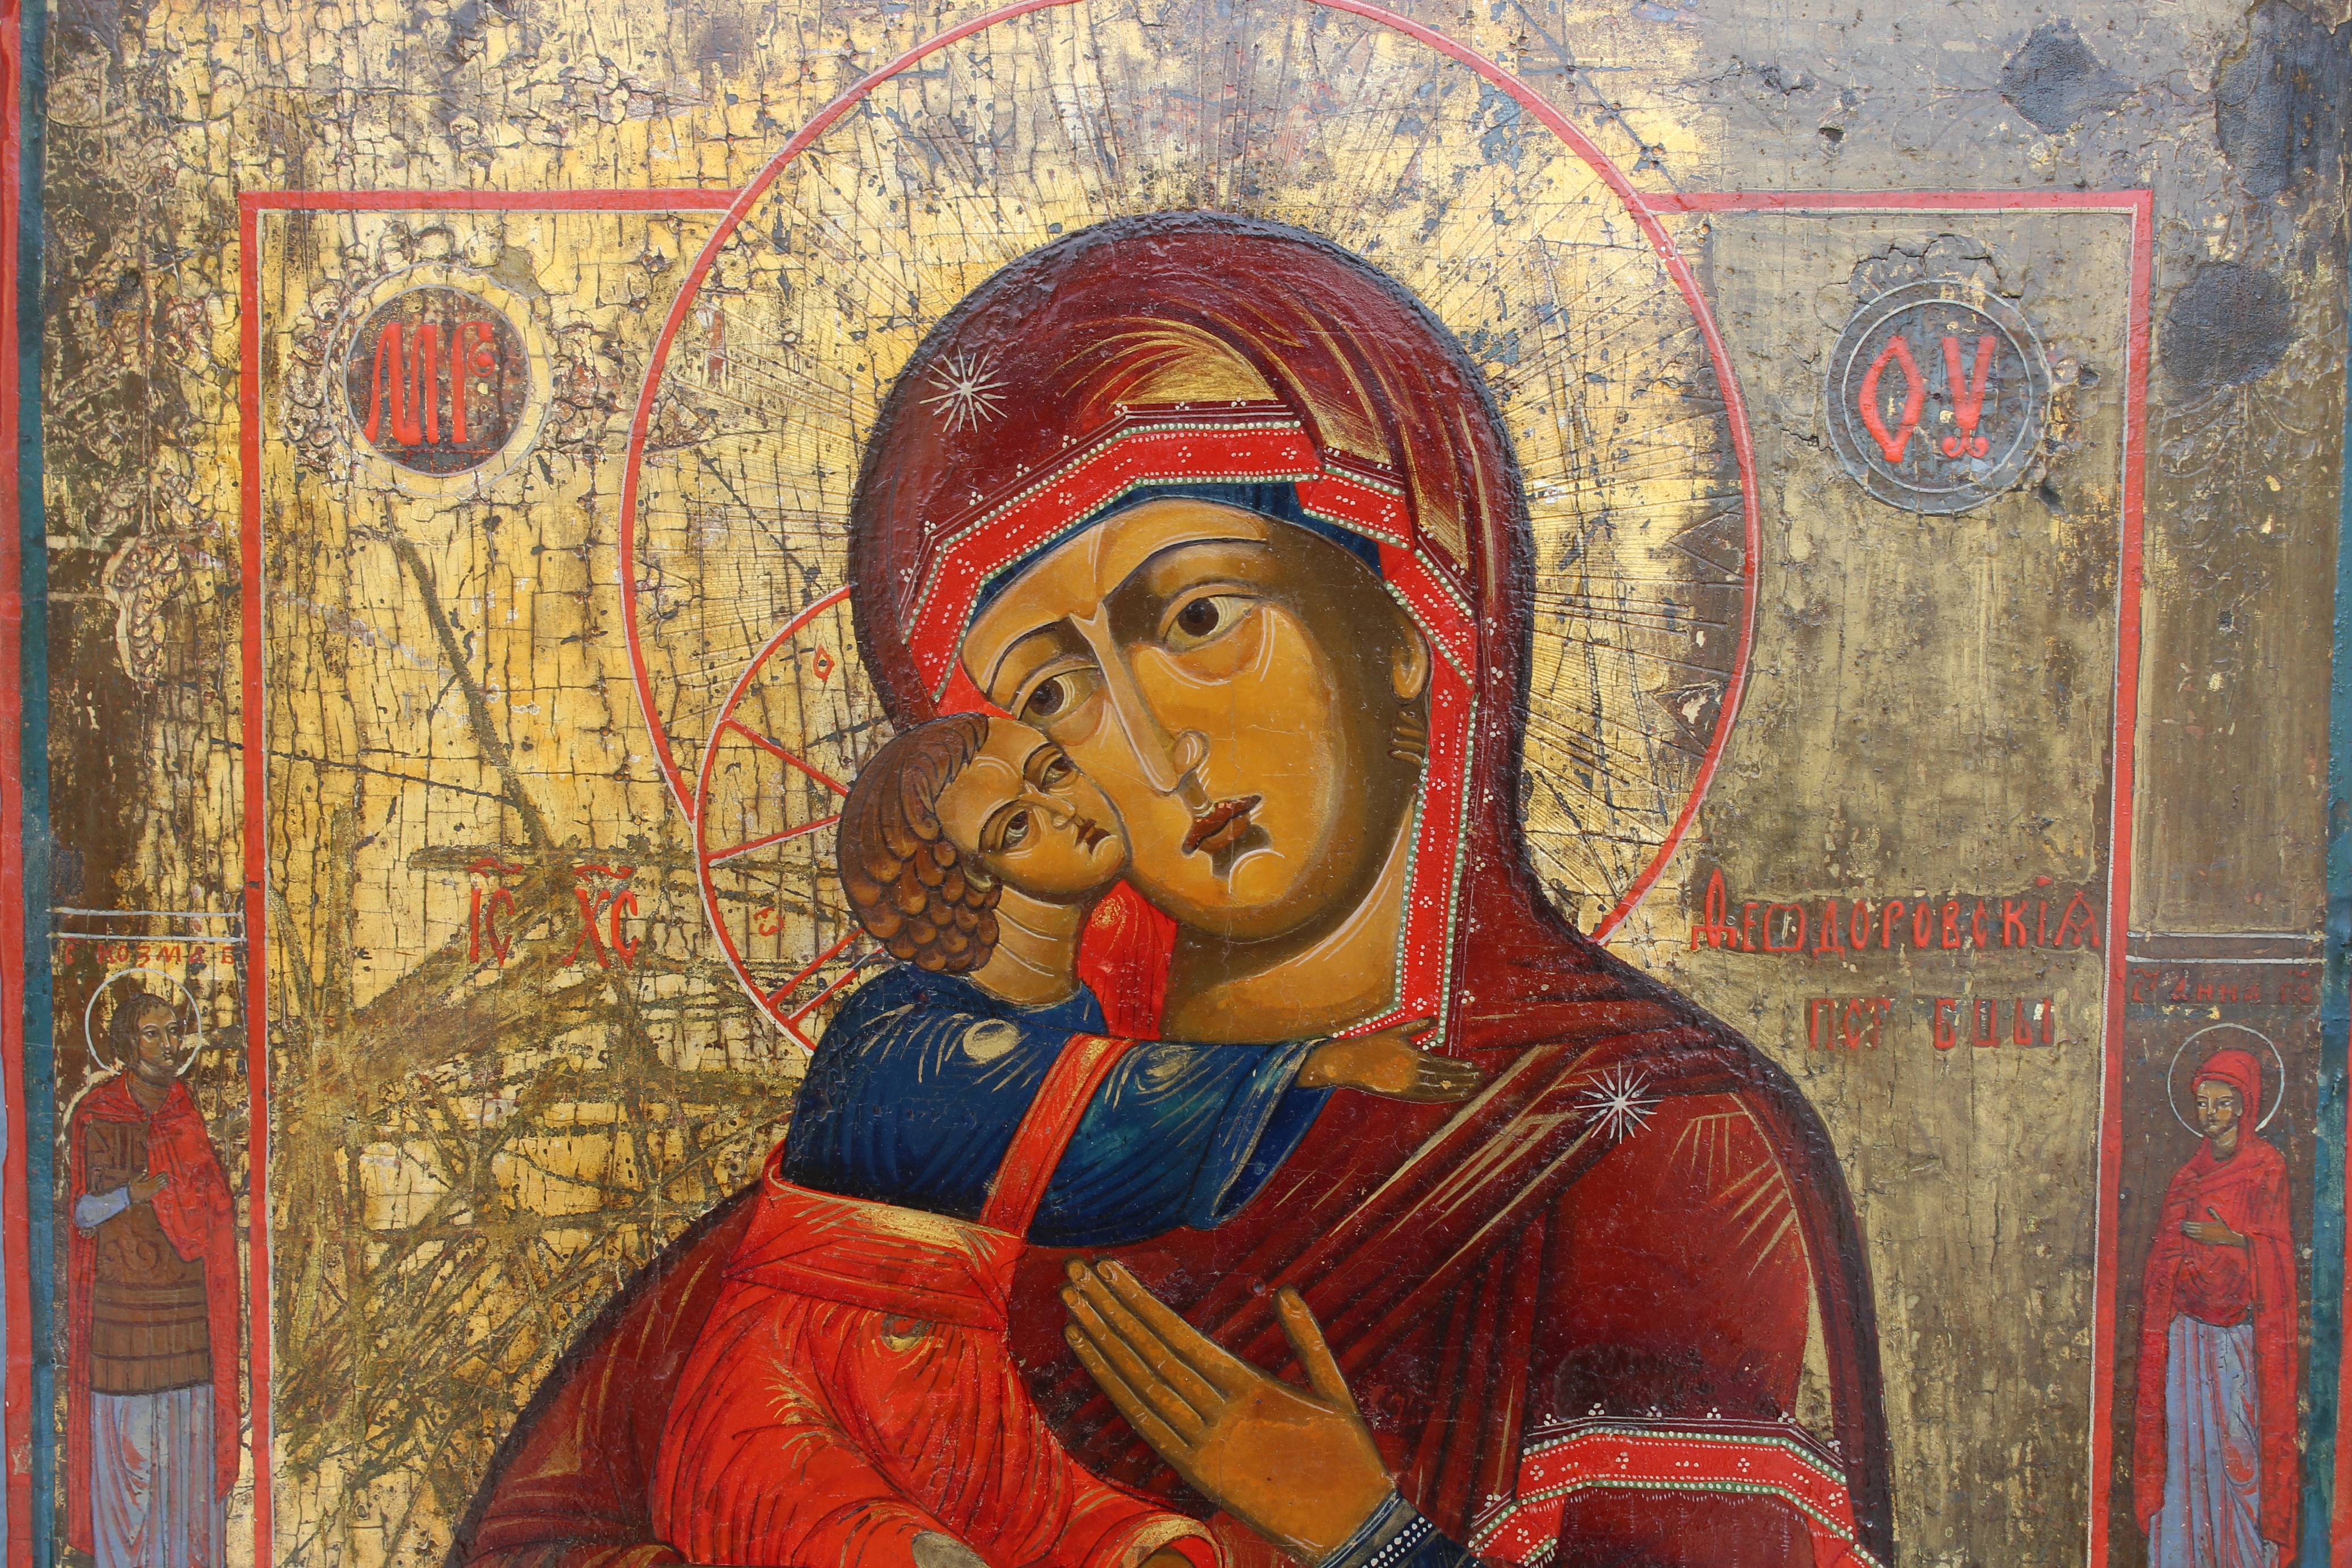 Exhibited Russian Icon, "Feodor Mother of God" - Image 3 of 4